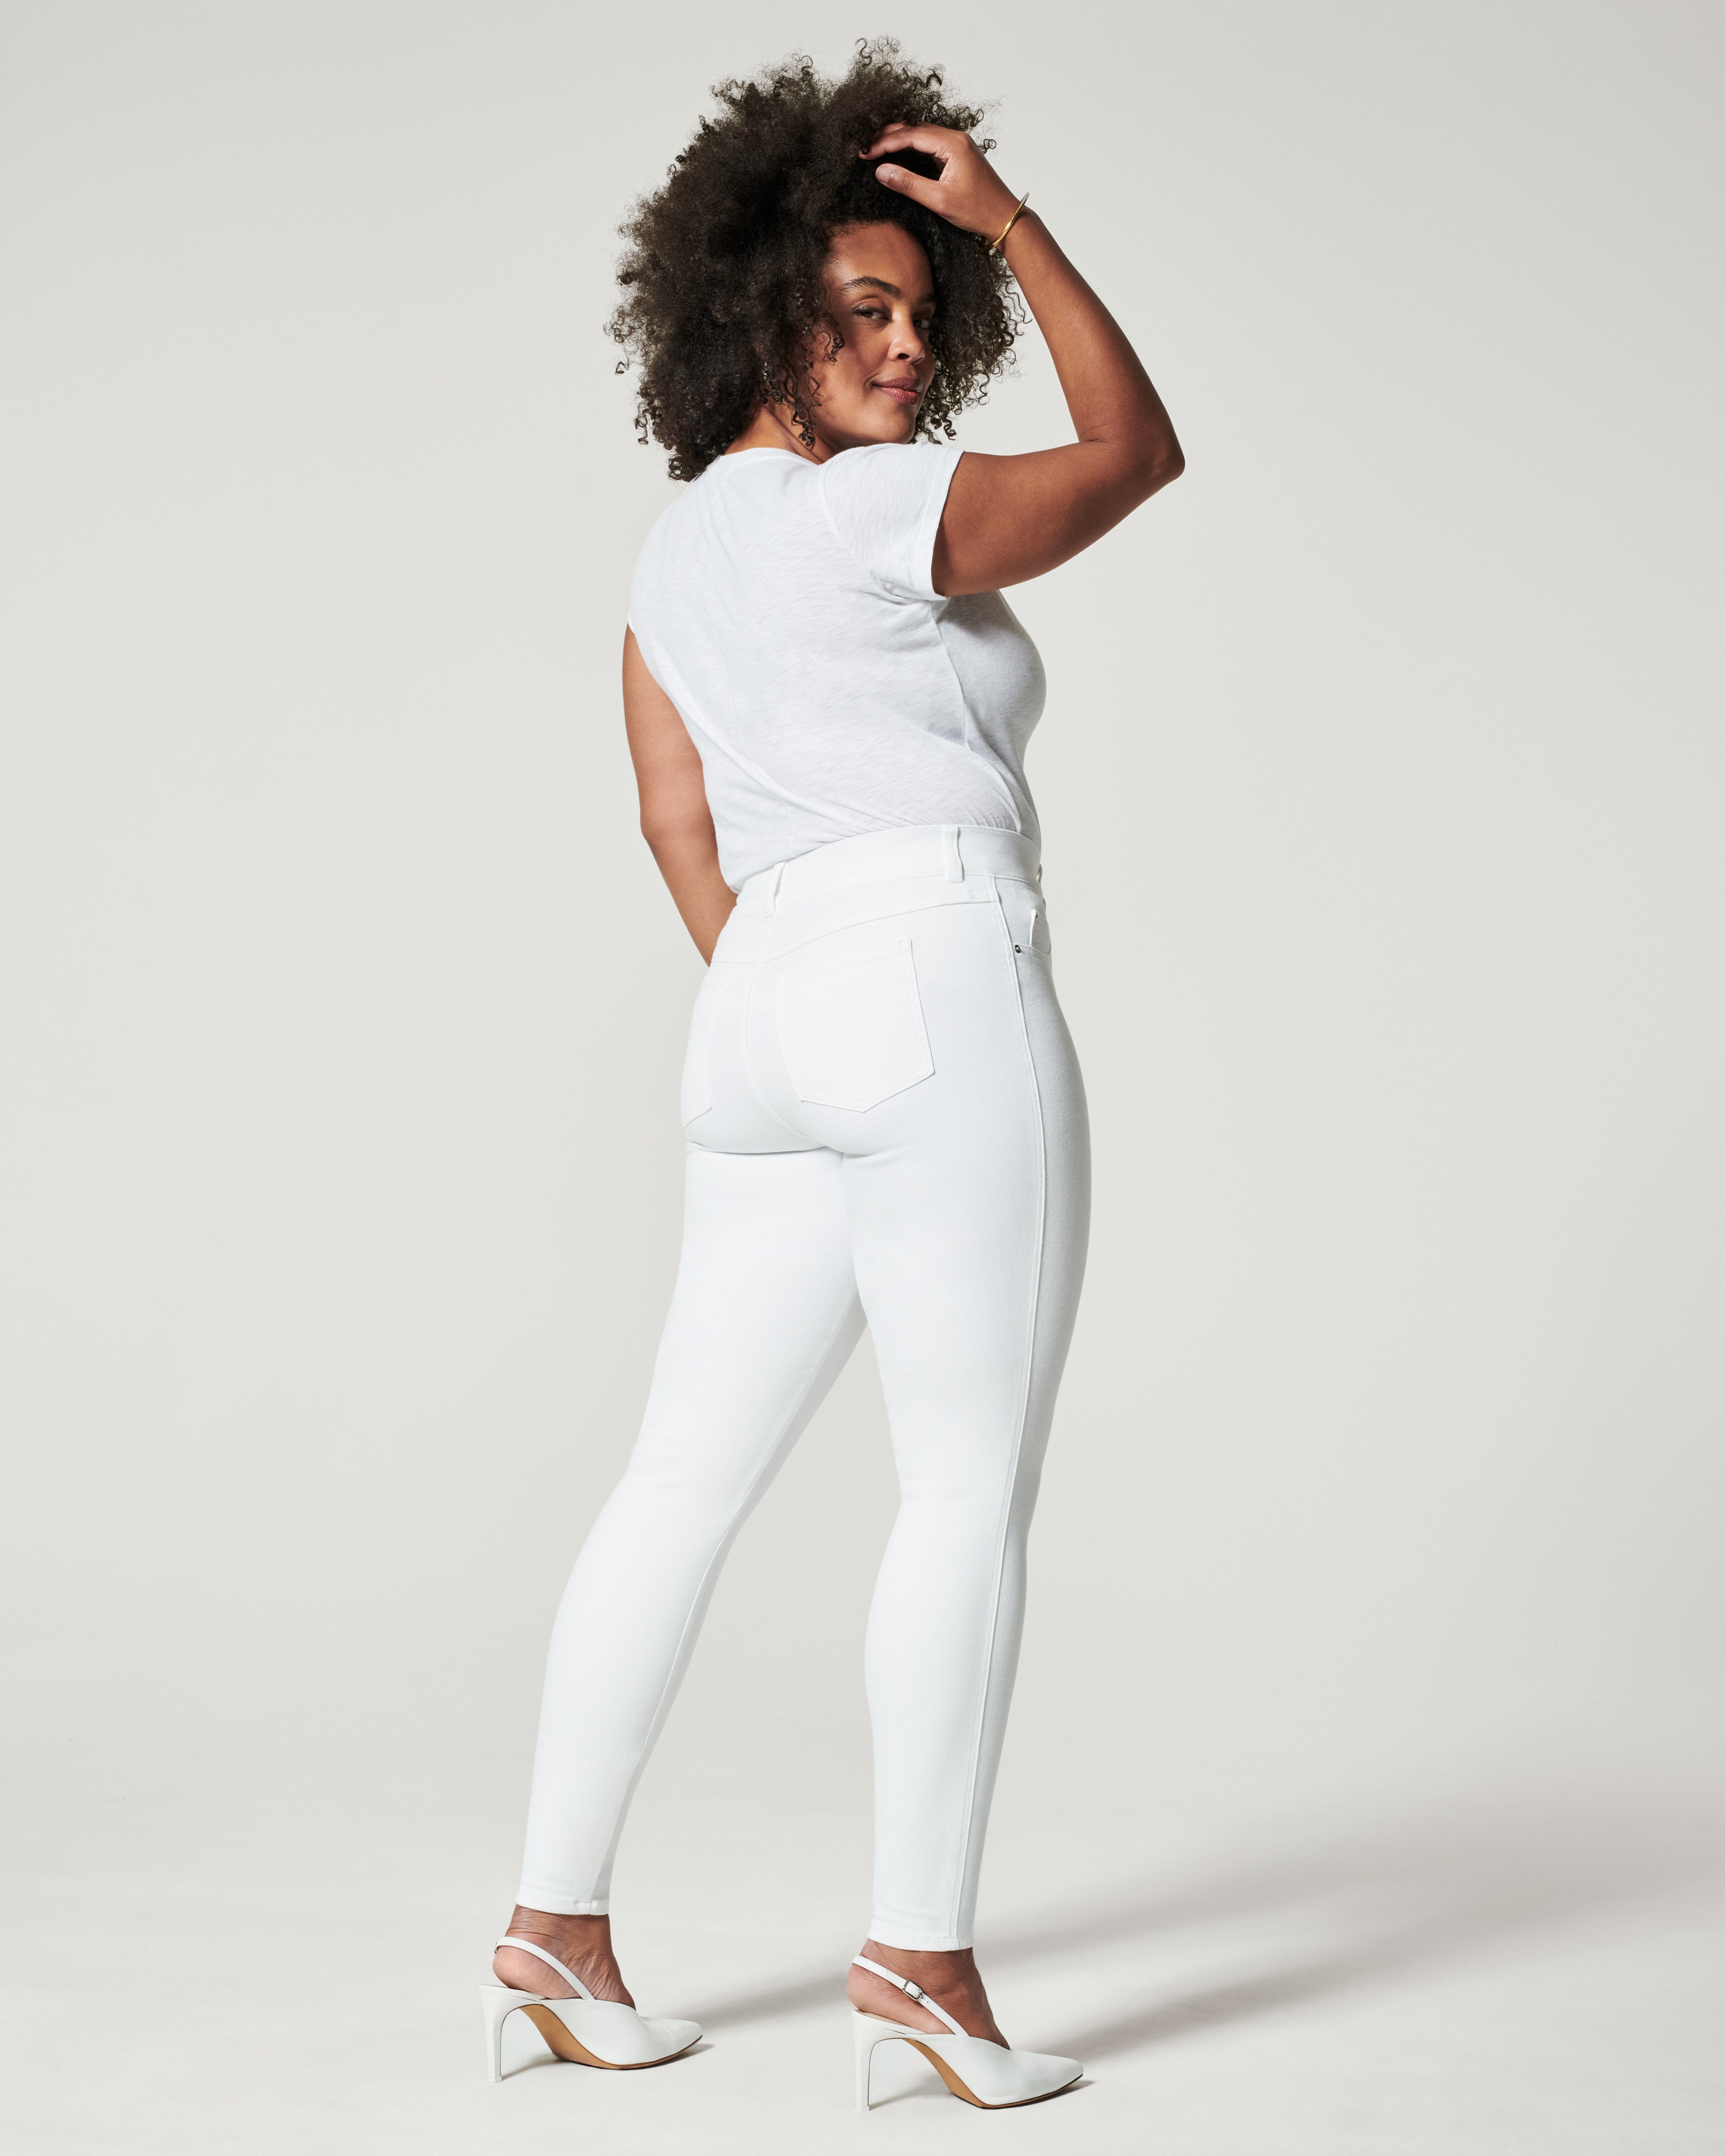 Spanx Firm Believer Sheer in White